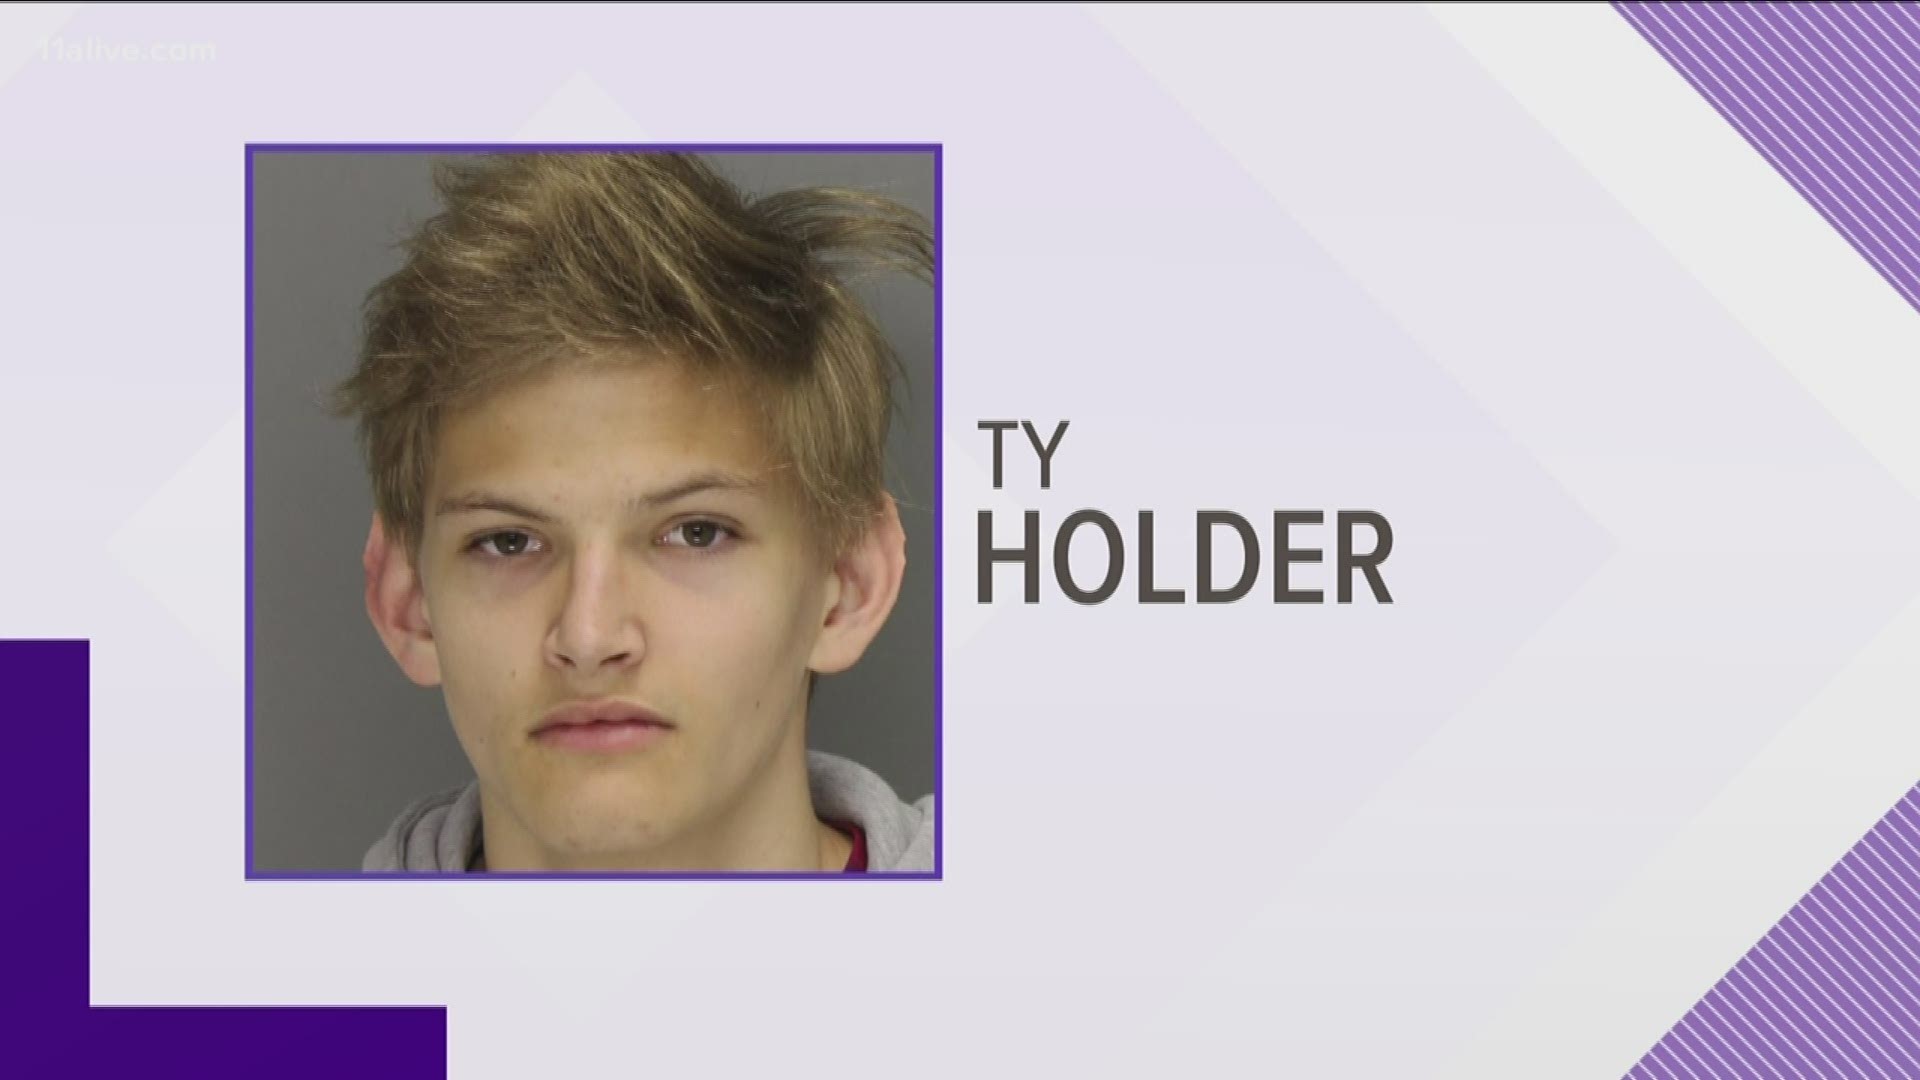 Ty Holder, a 17-year-old Walton High School student, faces two felony charges for the incident that happened last Tuesday.